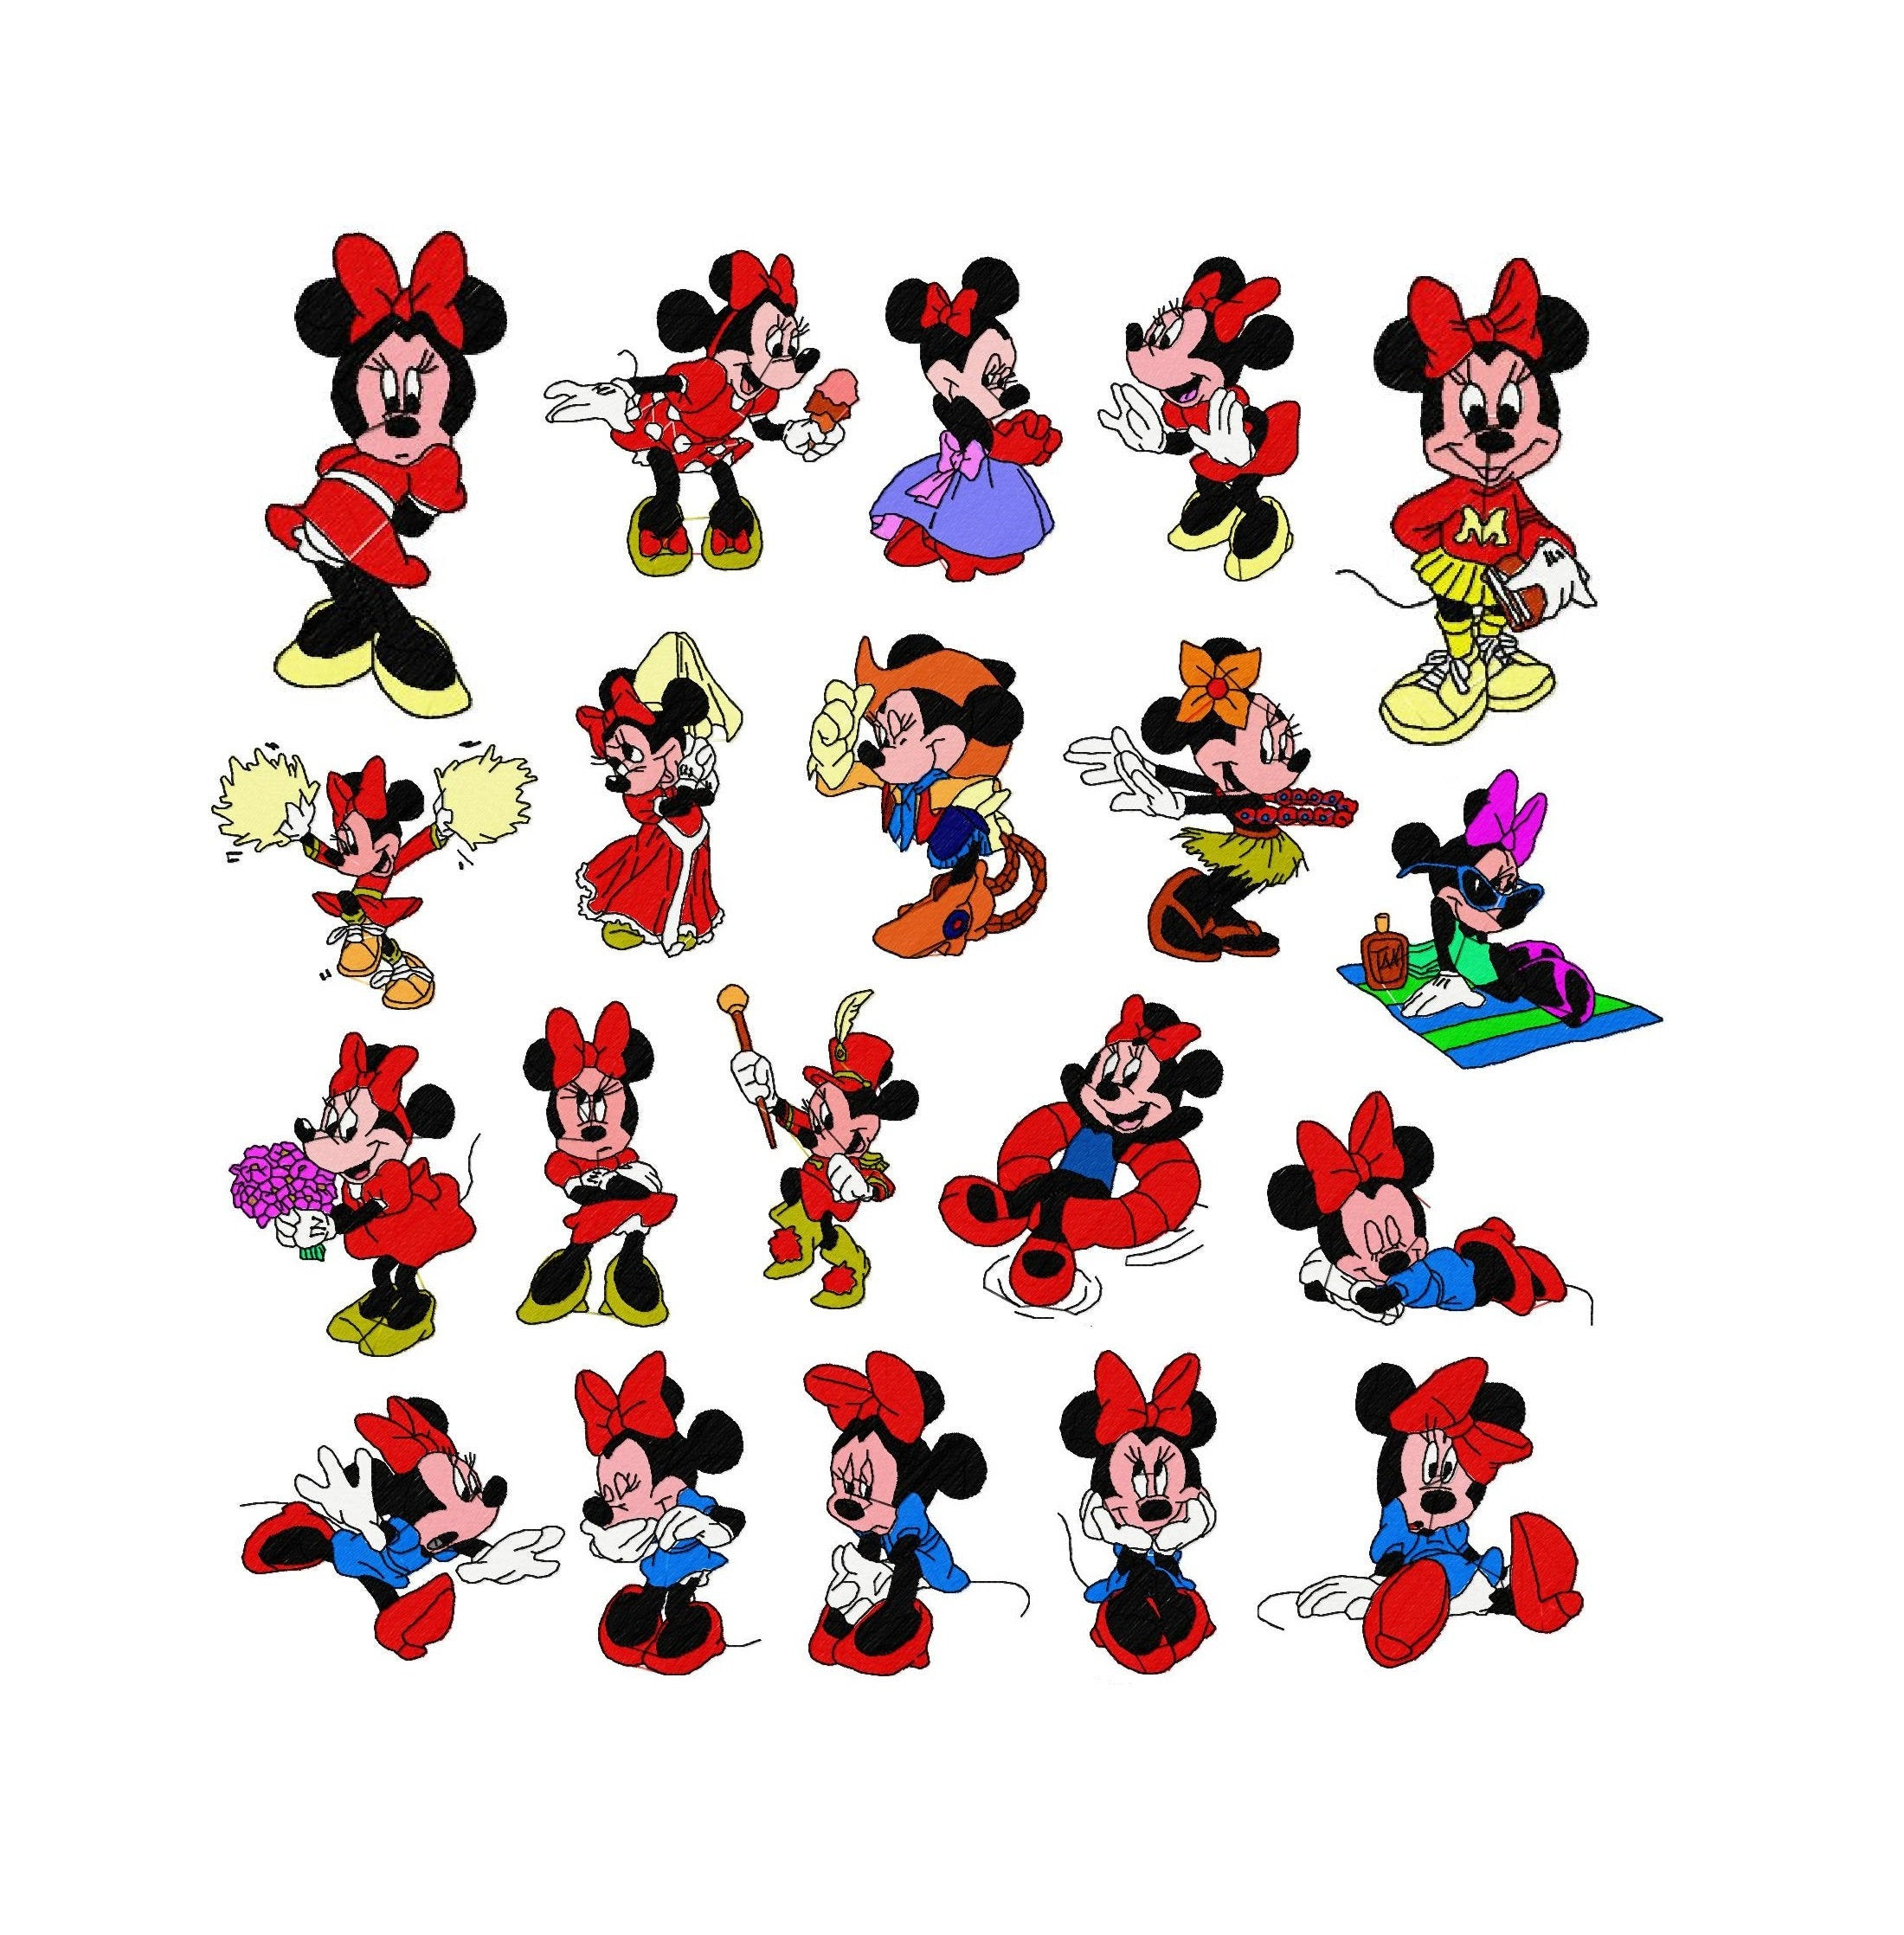 Disney Embroidery Patterns Minnie Mouse 20 Design 11 Formats Disney Embroidery Patterns File Children Embroidery Instant Download